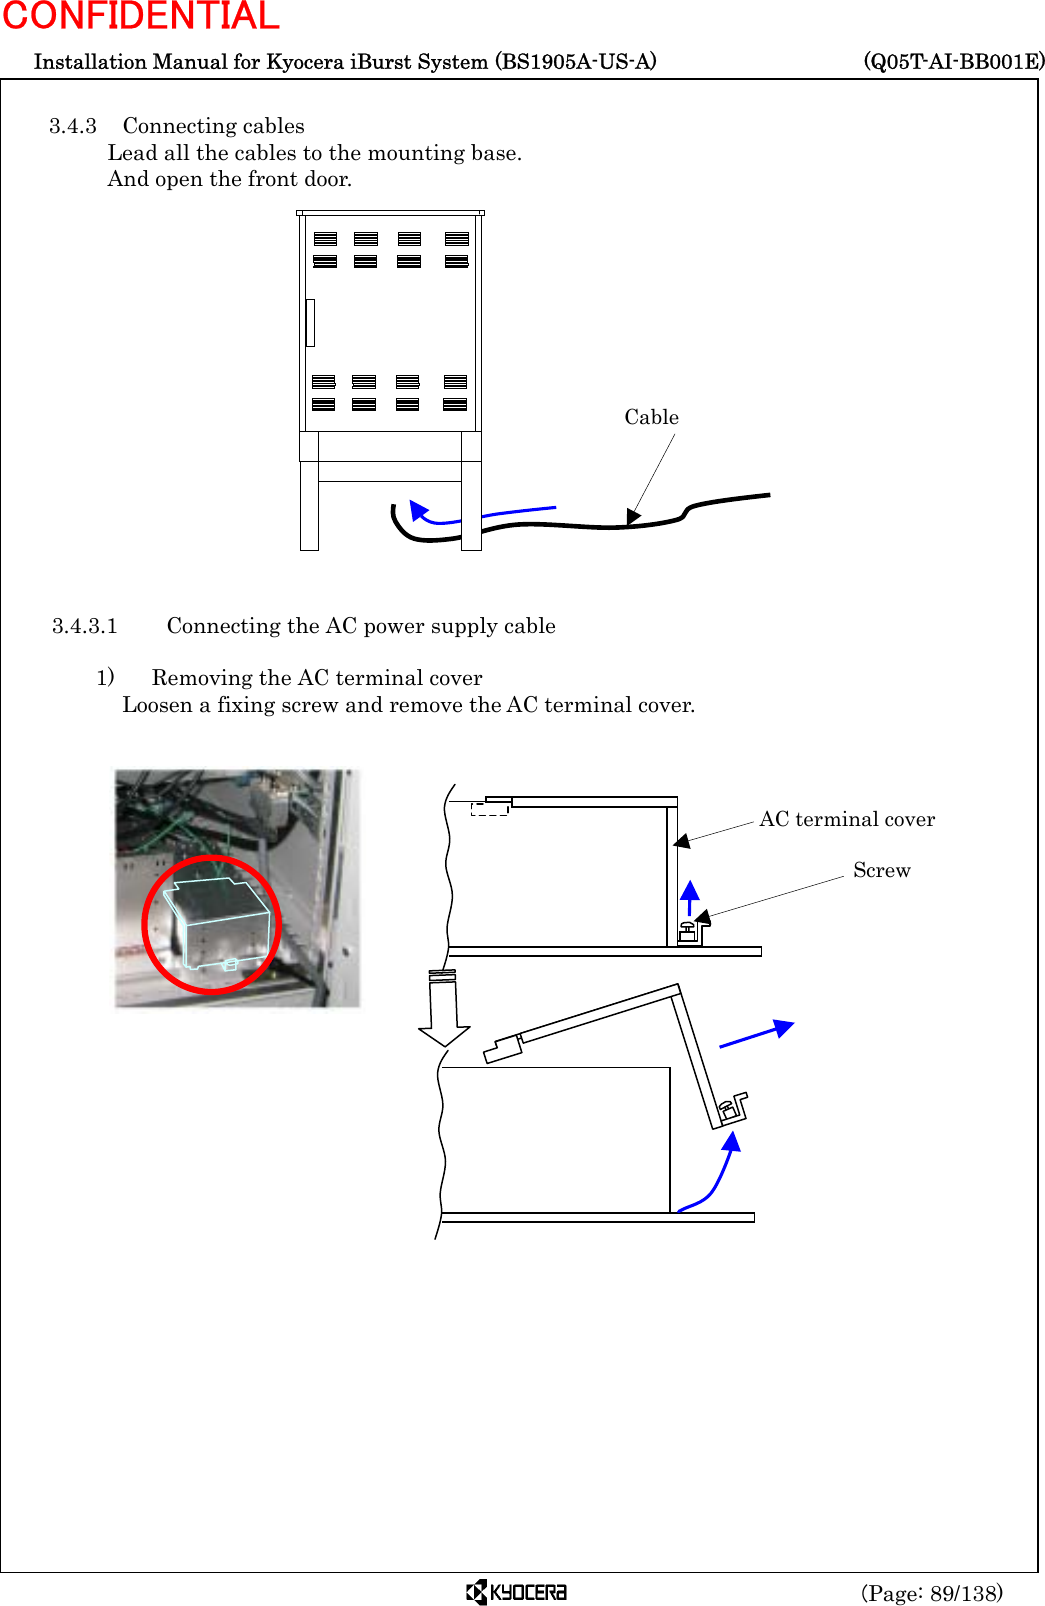  Installation Manual for Kyocera iBurst System (BS1905A-US-A)     (Q05T-AI-BB001E) (Page: 89/138) CONFIDENTIAL  3.4.3 Connecting cables Lead all the cables to the mounting base. And open the front door.                 3.4.3.1   Connecting the AC power supply cable  1)    Removing the AC terminal cover Loosen a fixing screw and remove the AC terminal cover.                 Cable AC terminal cover Screw 